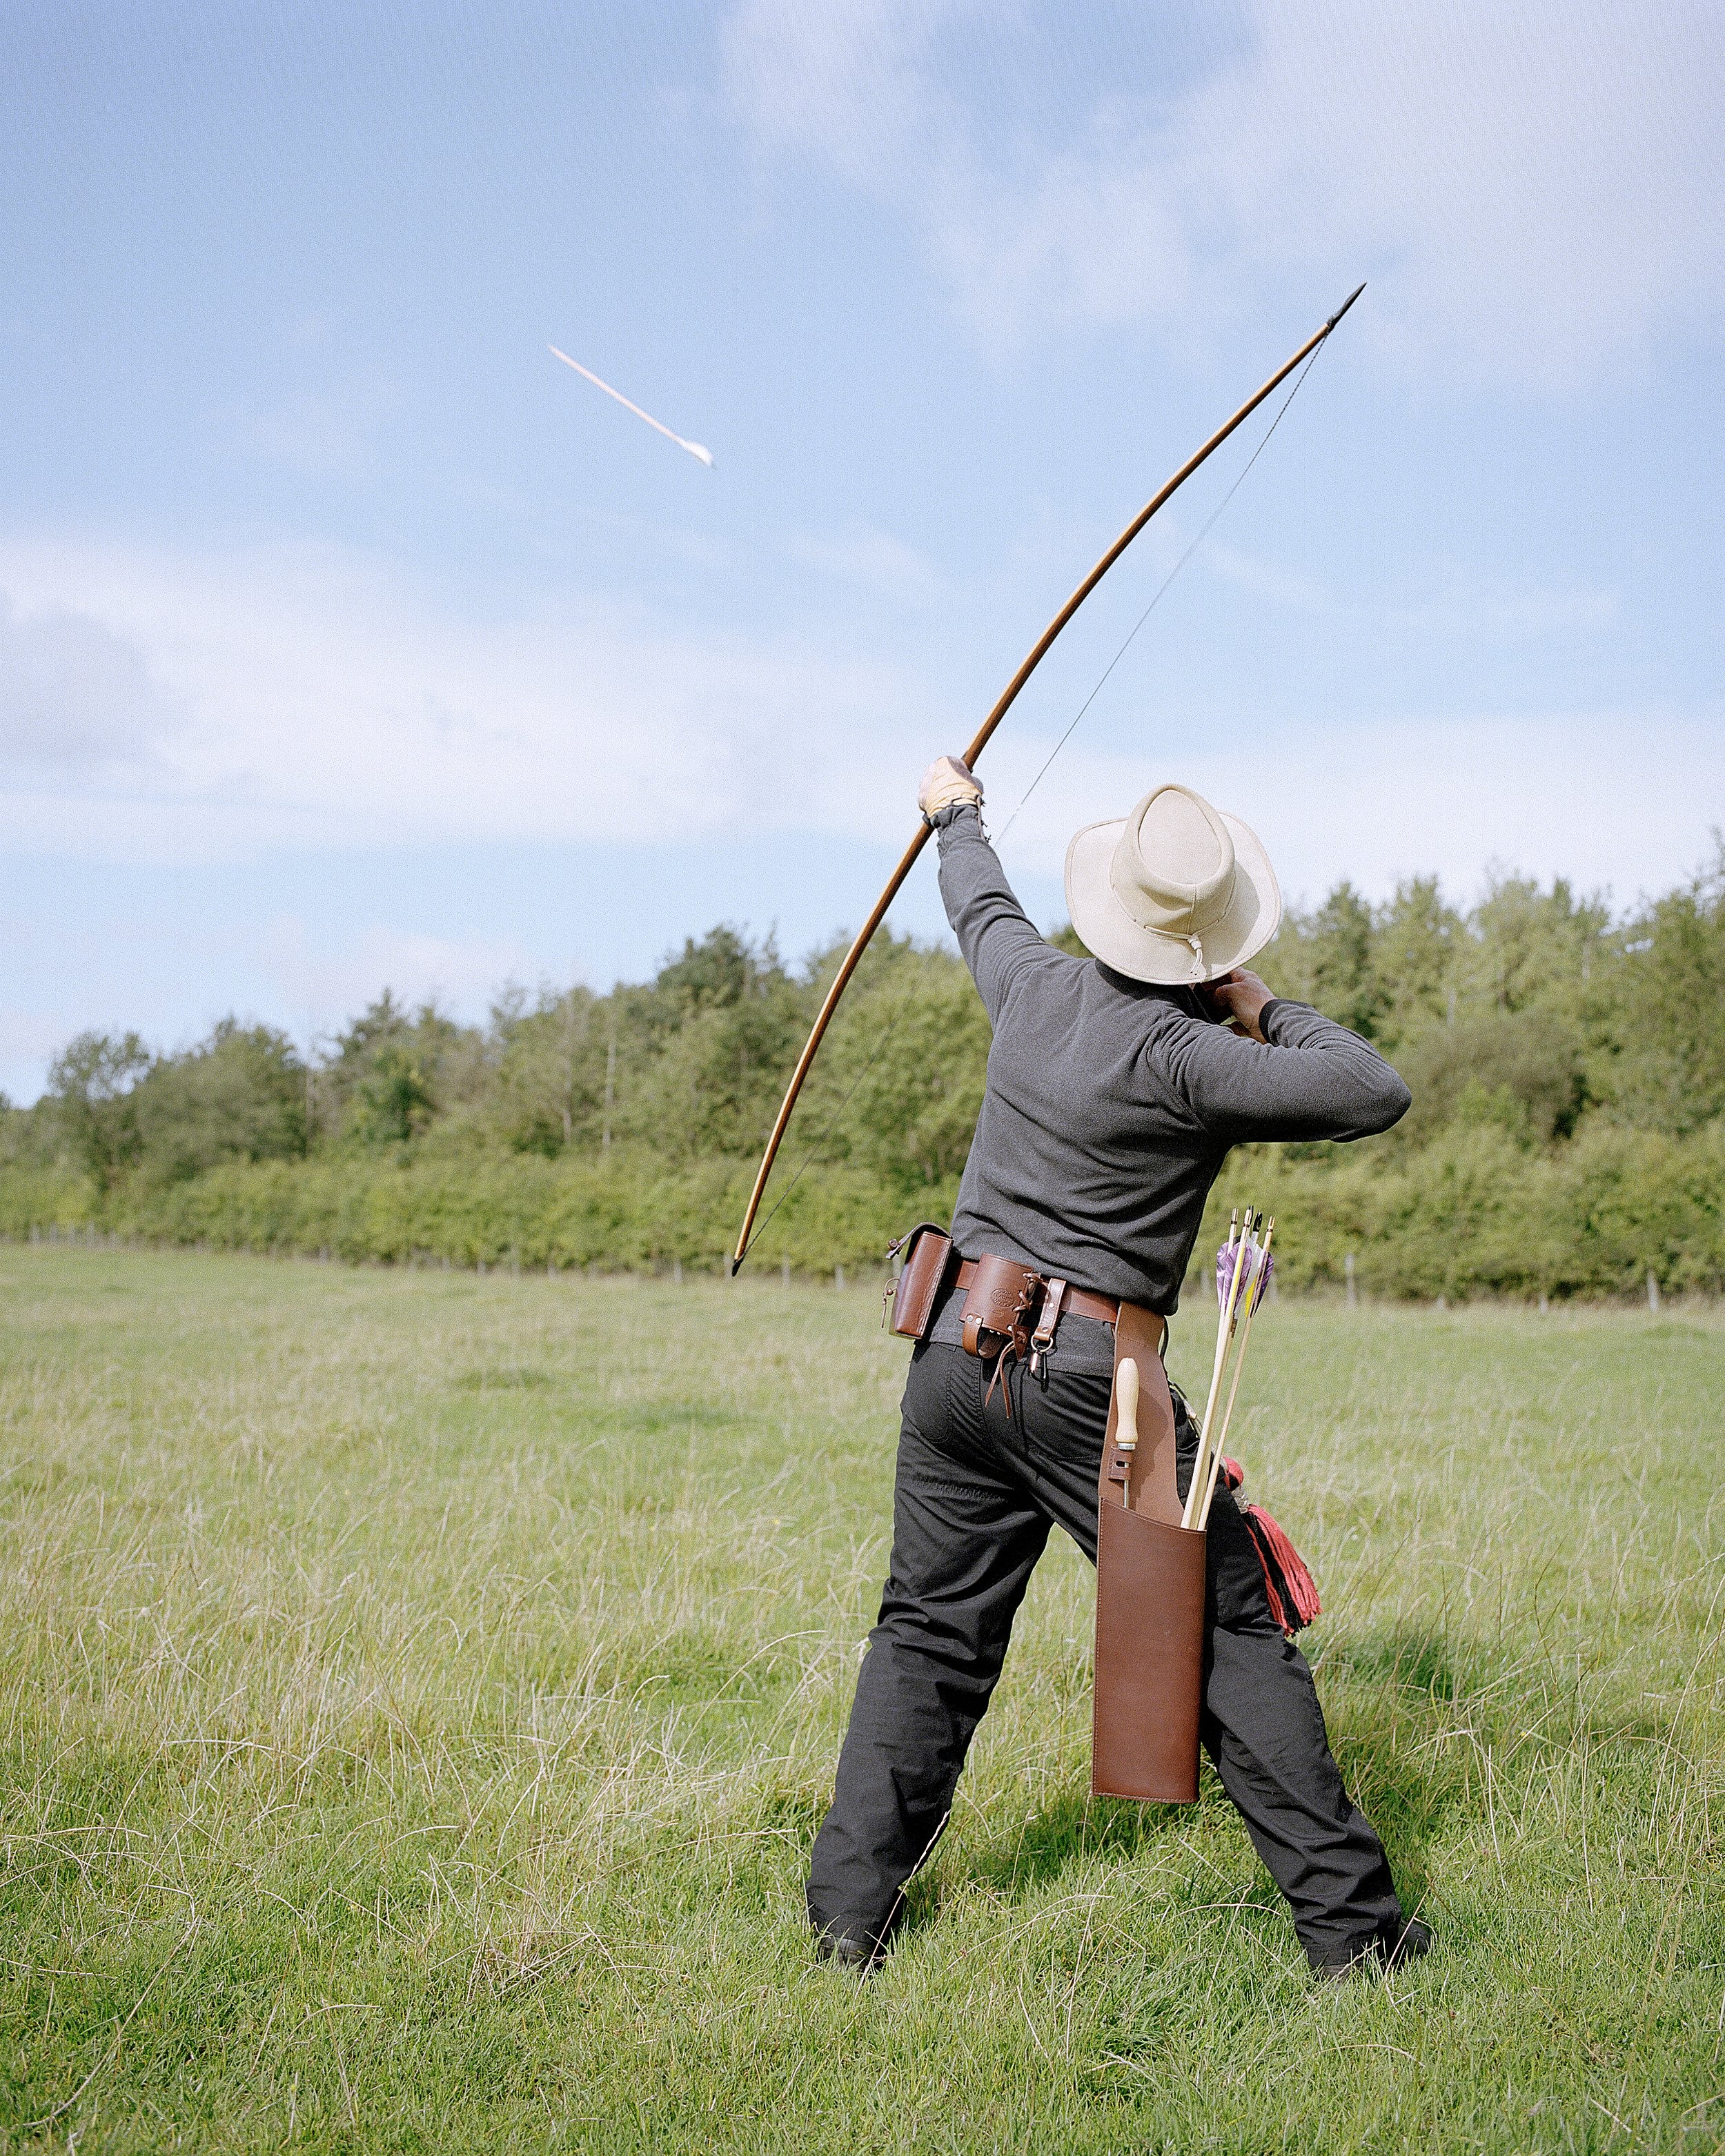   Personal  / In Fields of Albion   The importance of the Longbow in English culture can be seen in legends such as Robin Hood, and its fabled victory at Agincourt celebrated. Where is the Longbow today? In Fields Of Albion meets England’s companies 